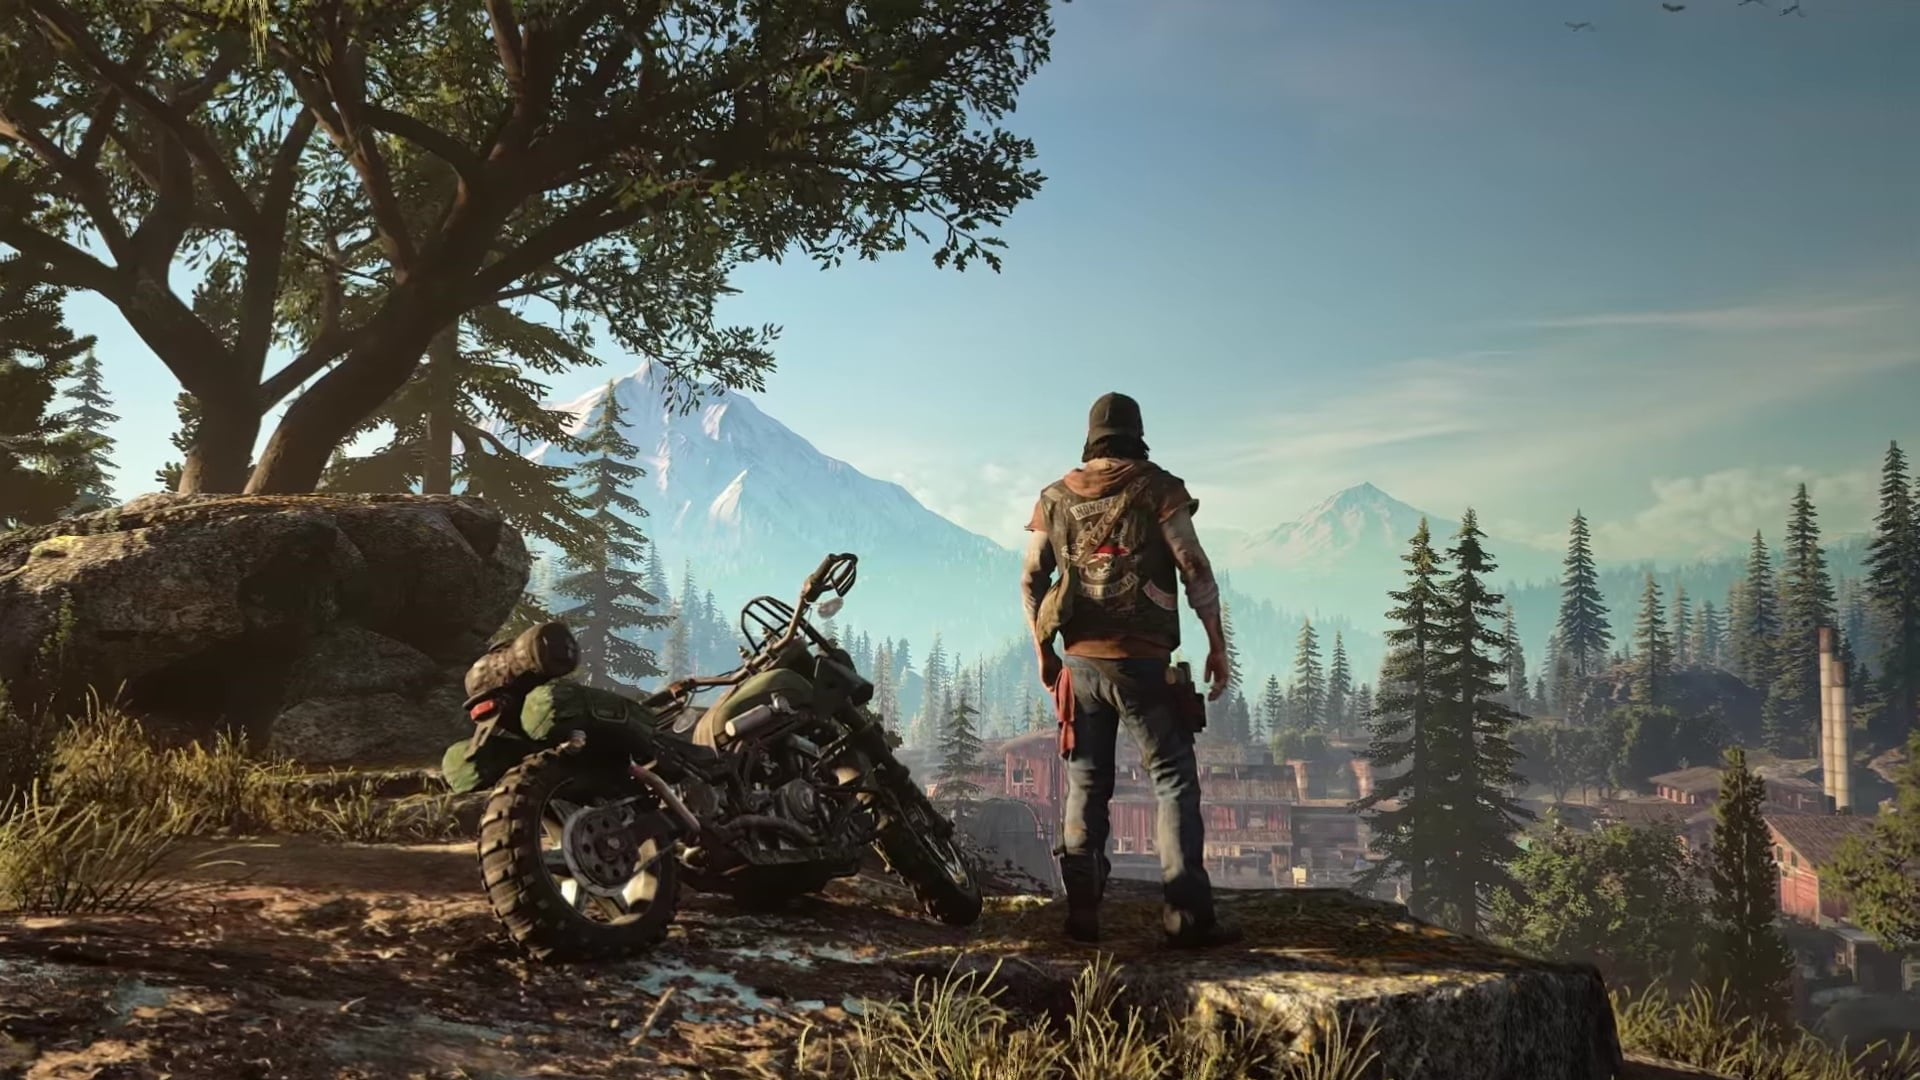 Days gone 2 petition. I know it's not likely but PC gamers got